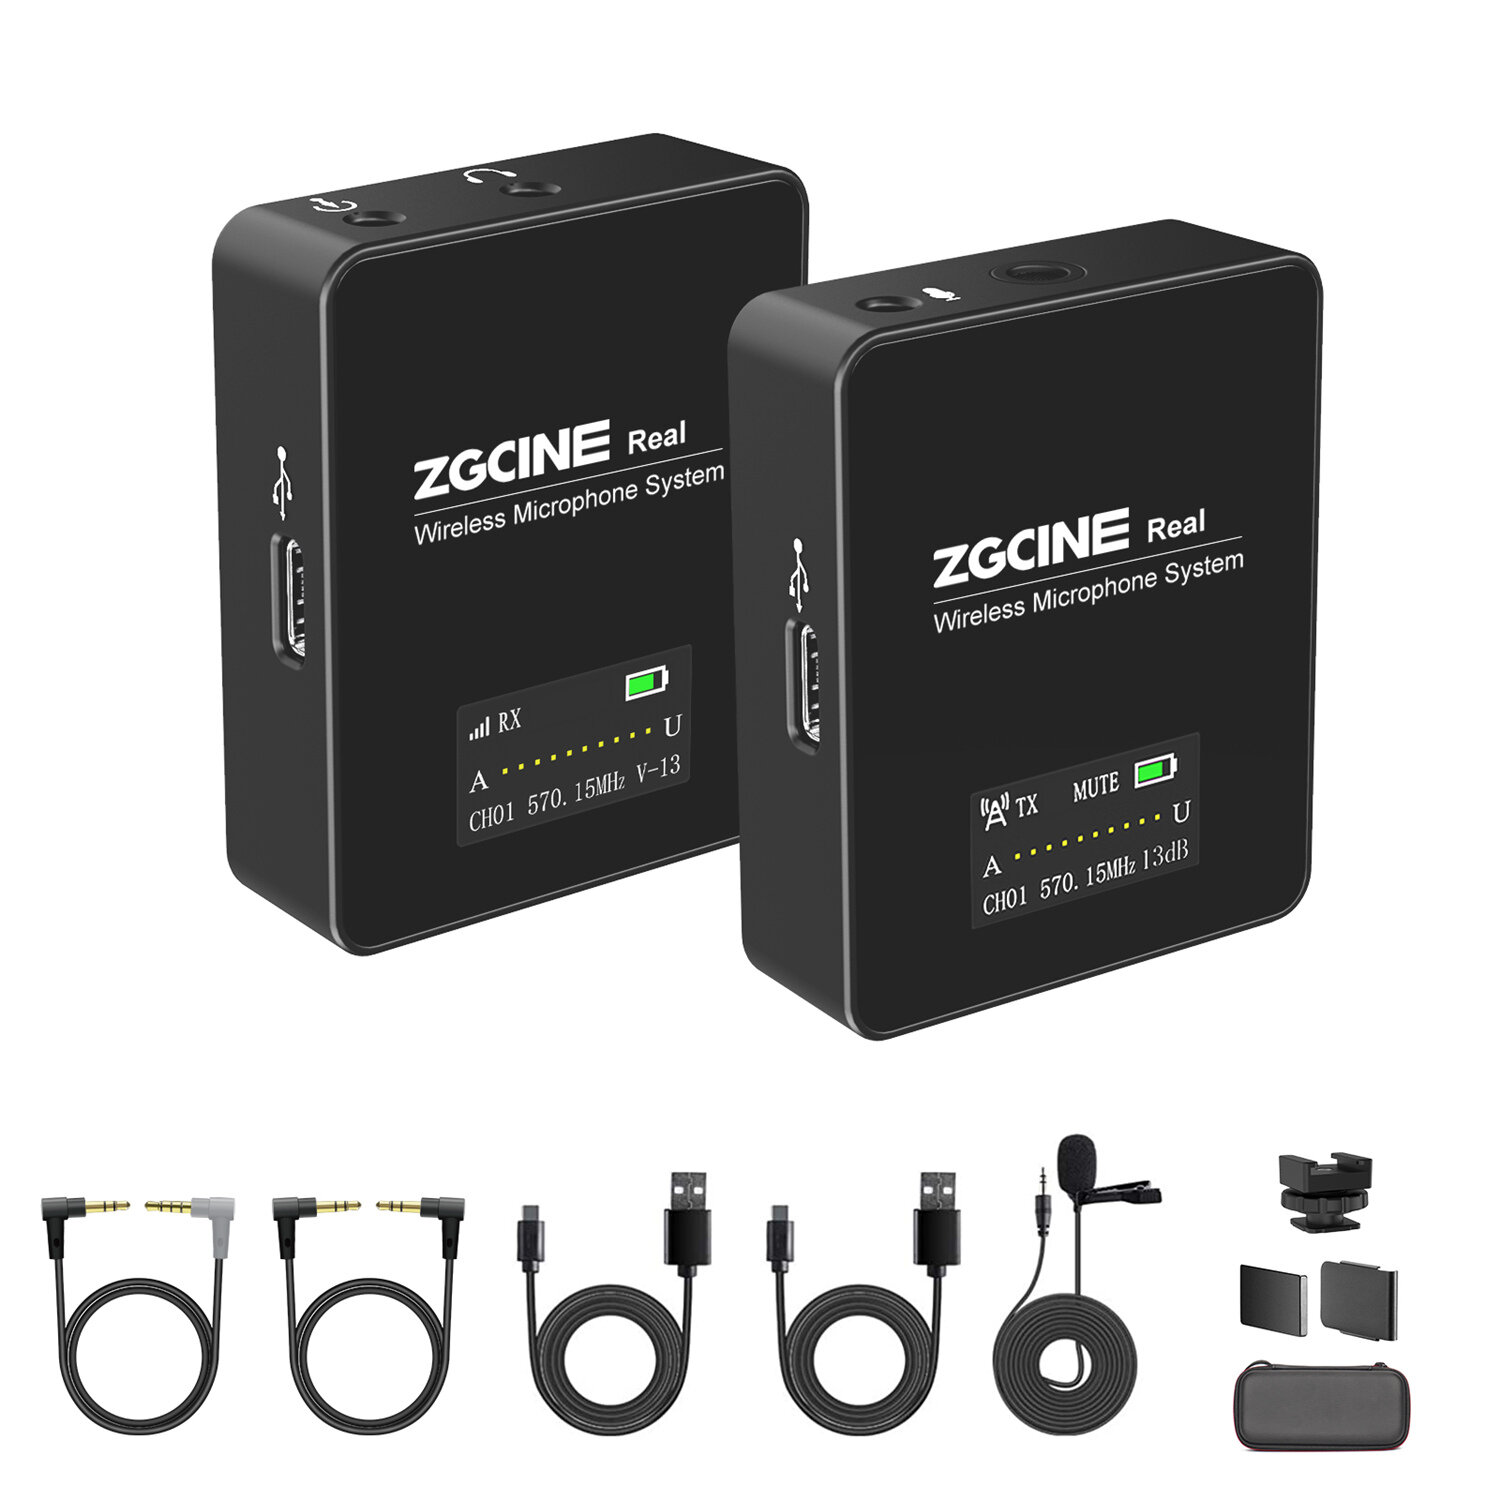 ZZGCINE GO 1V1 UHF Wireless Lavalier Lapel Microphone System with Transmitter and Receiver for Smart